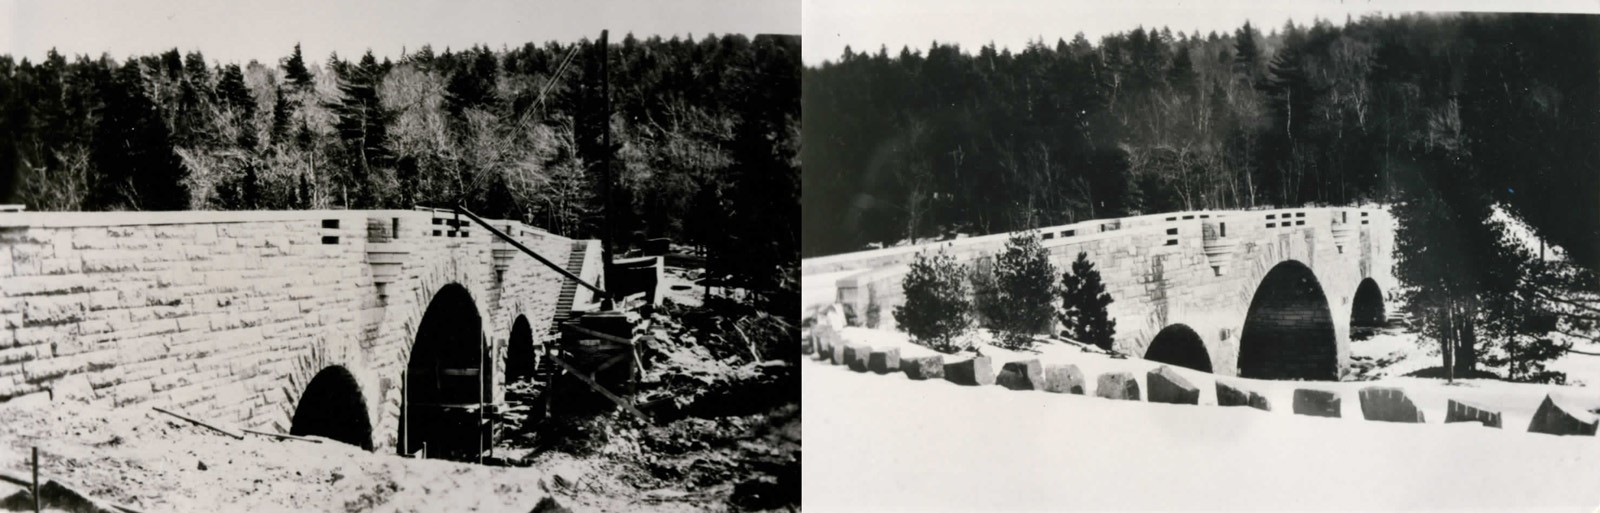 As illustrated in the monograph: Duck Brook Bridge under construction, left; the completed Duck Brook Bridge with plantings, right